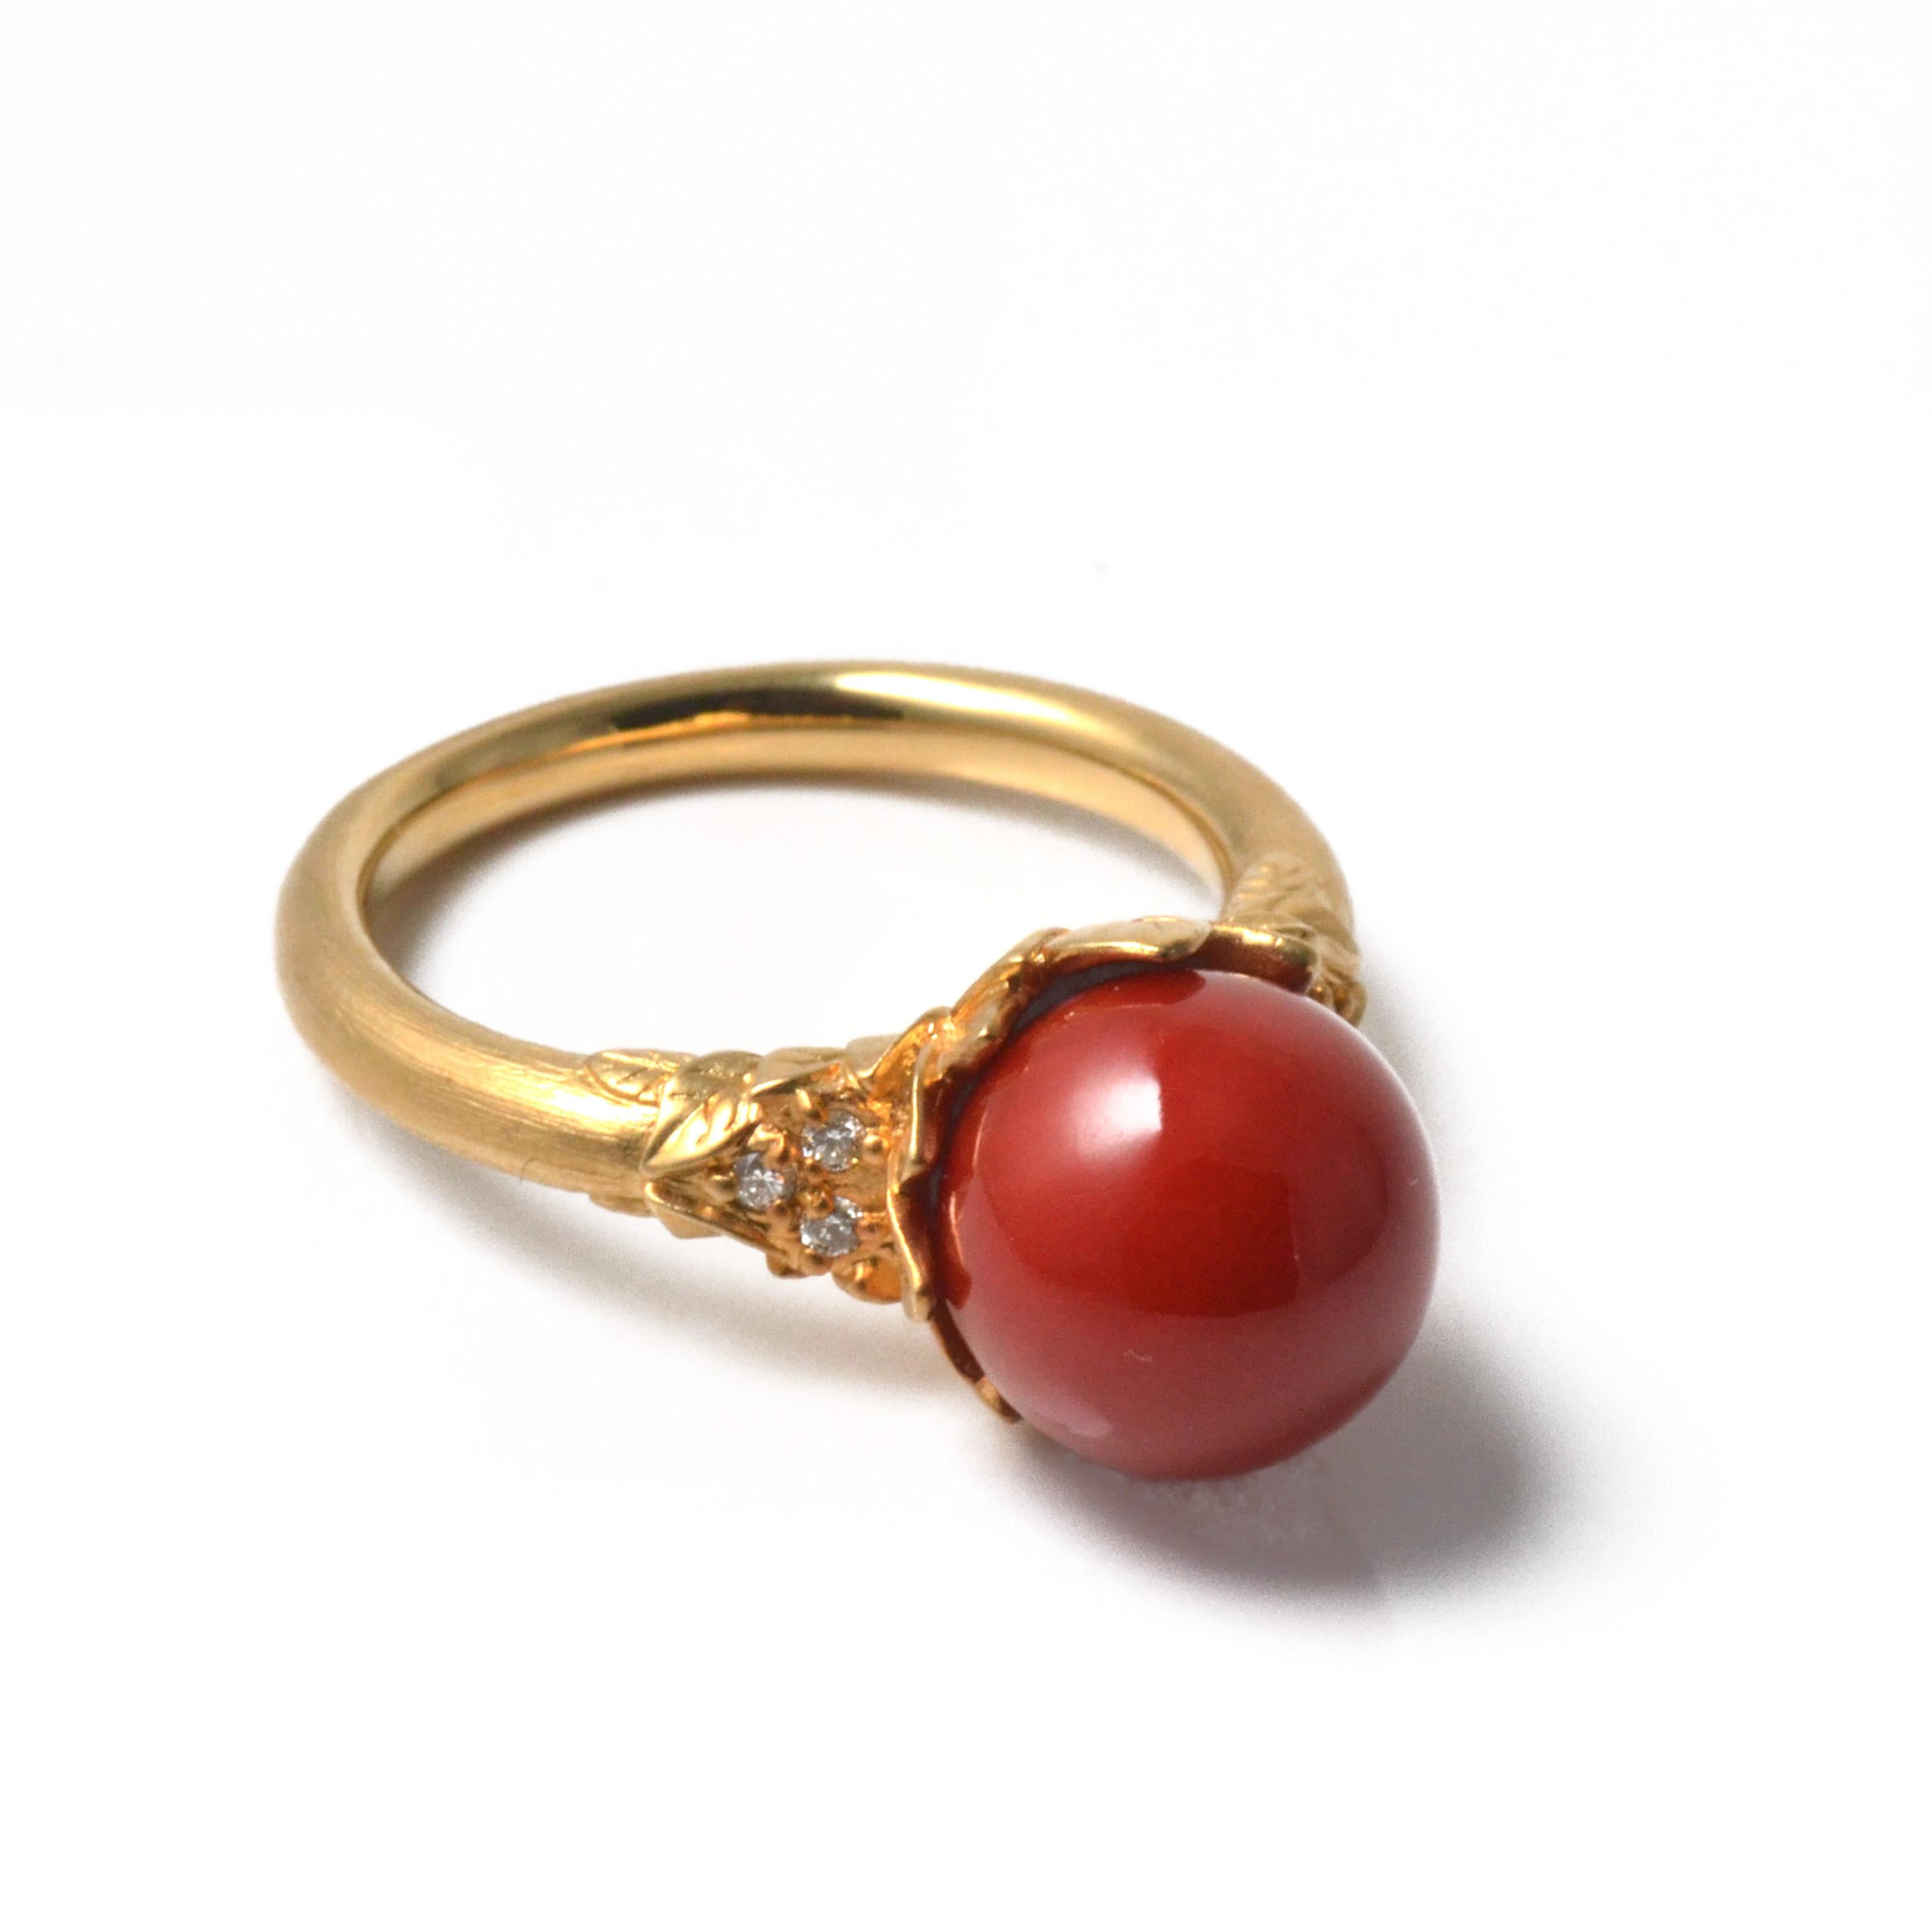 Nowadays, 10mm Chiaka Sango (oxblood coral) is very rare. This 18 karat yellow gold ring, with its botanical design and leaf motif, matte finish, and surface texture, is truly unique. Diamonds (0.06 carats total weight) enhance the coral’s beauty.